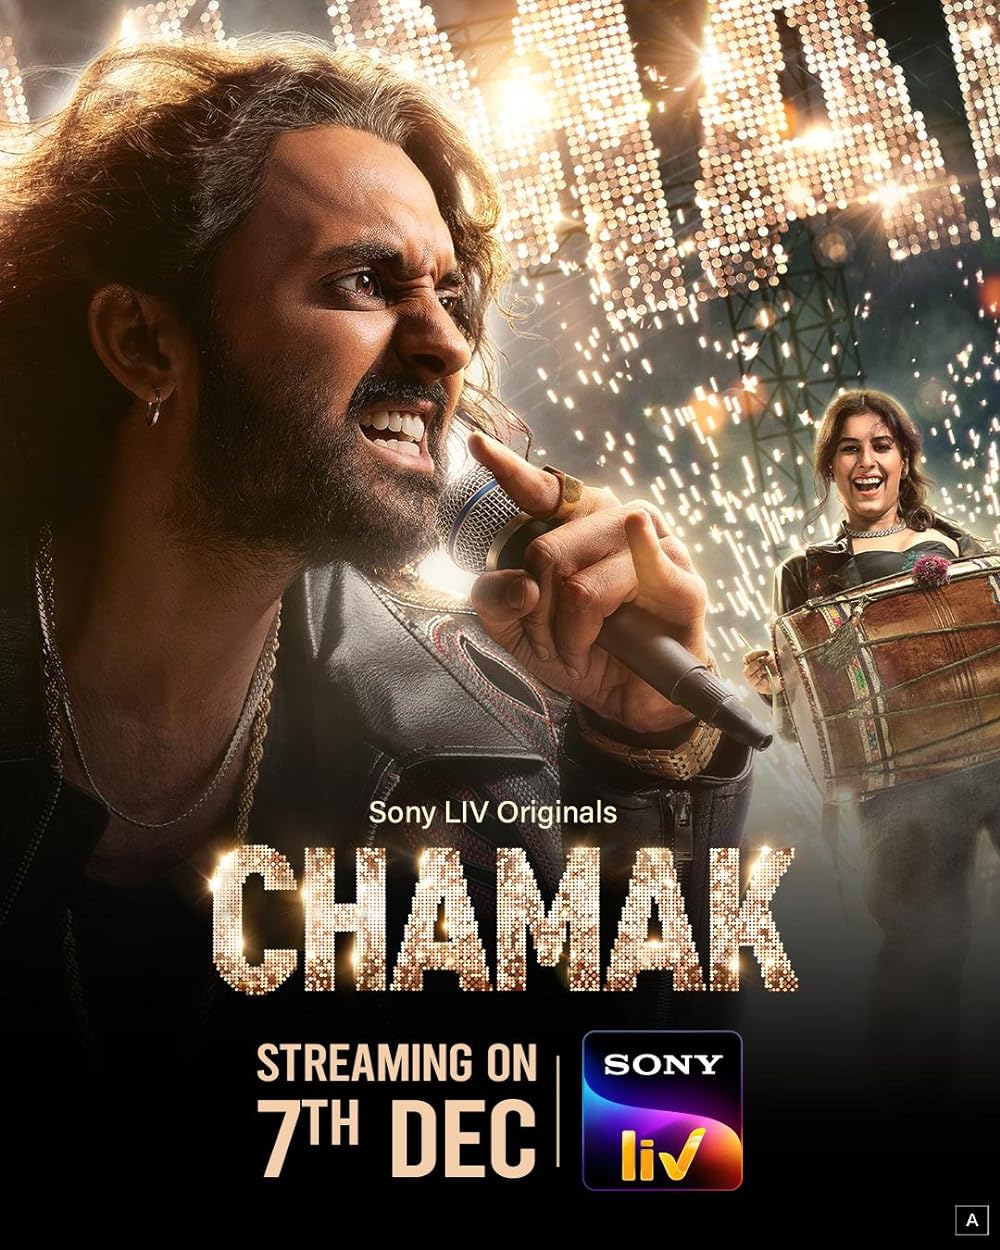 Chamak (December 7) - Streaming on SonyLIVChamak follows Kaala, an aspiring young rapper investigating his father's enigmatic demise in Punjab's music scene. The series delves into political intrigue, intense family sagas, and the haunting issue of honor killings.